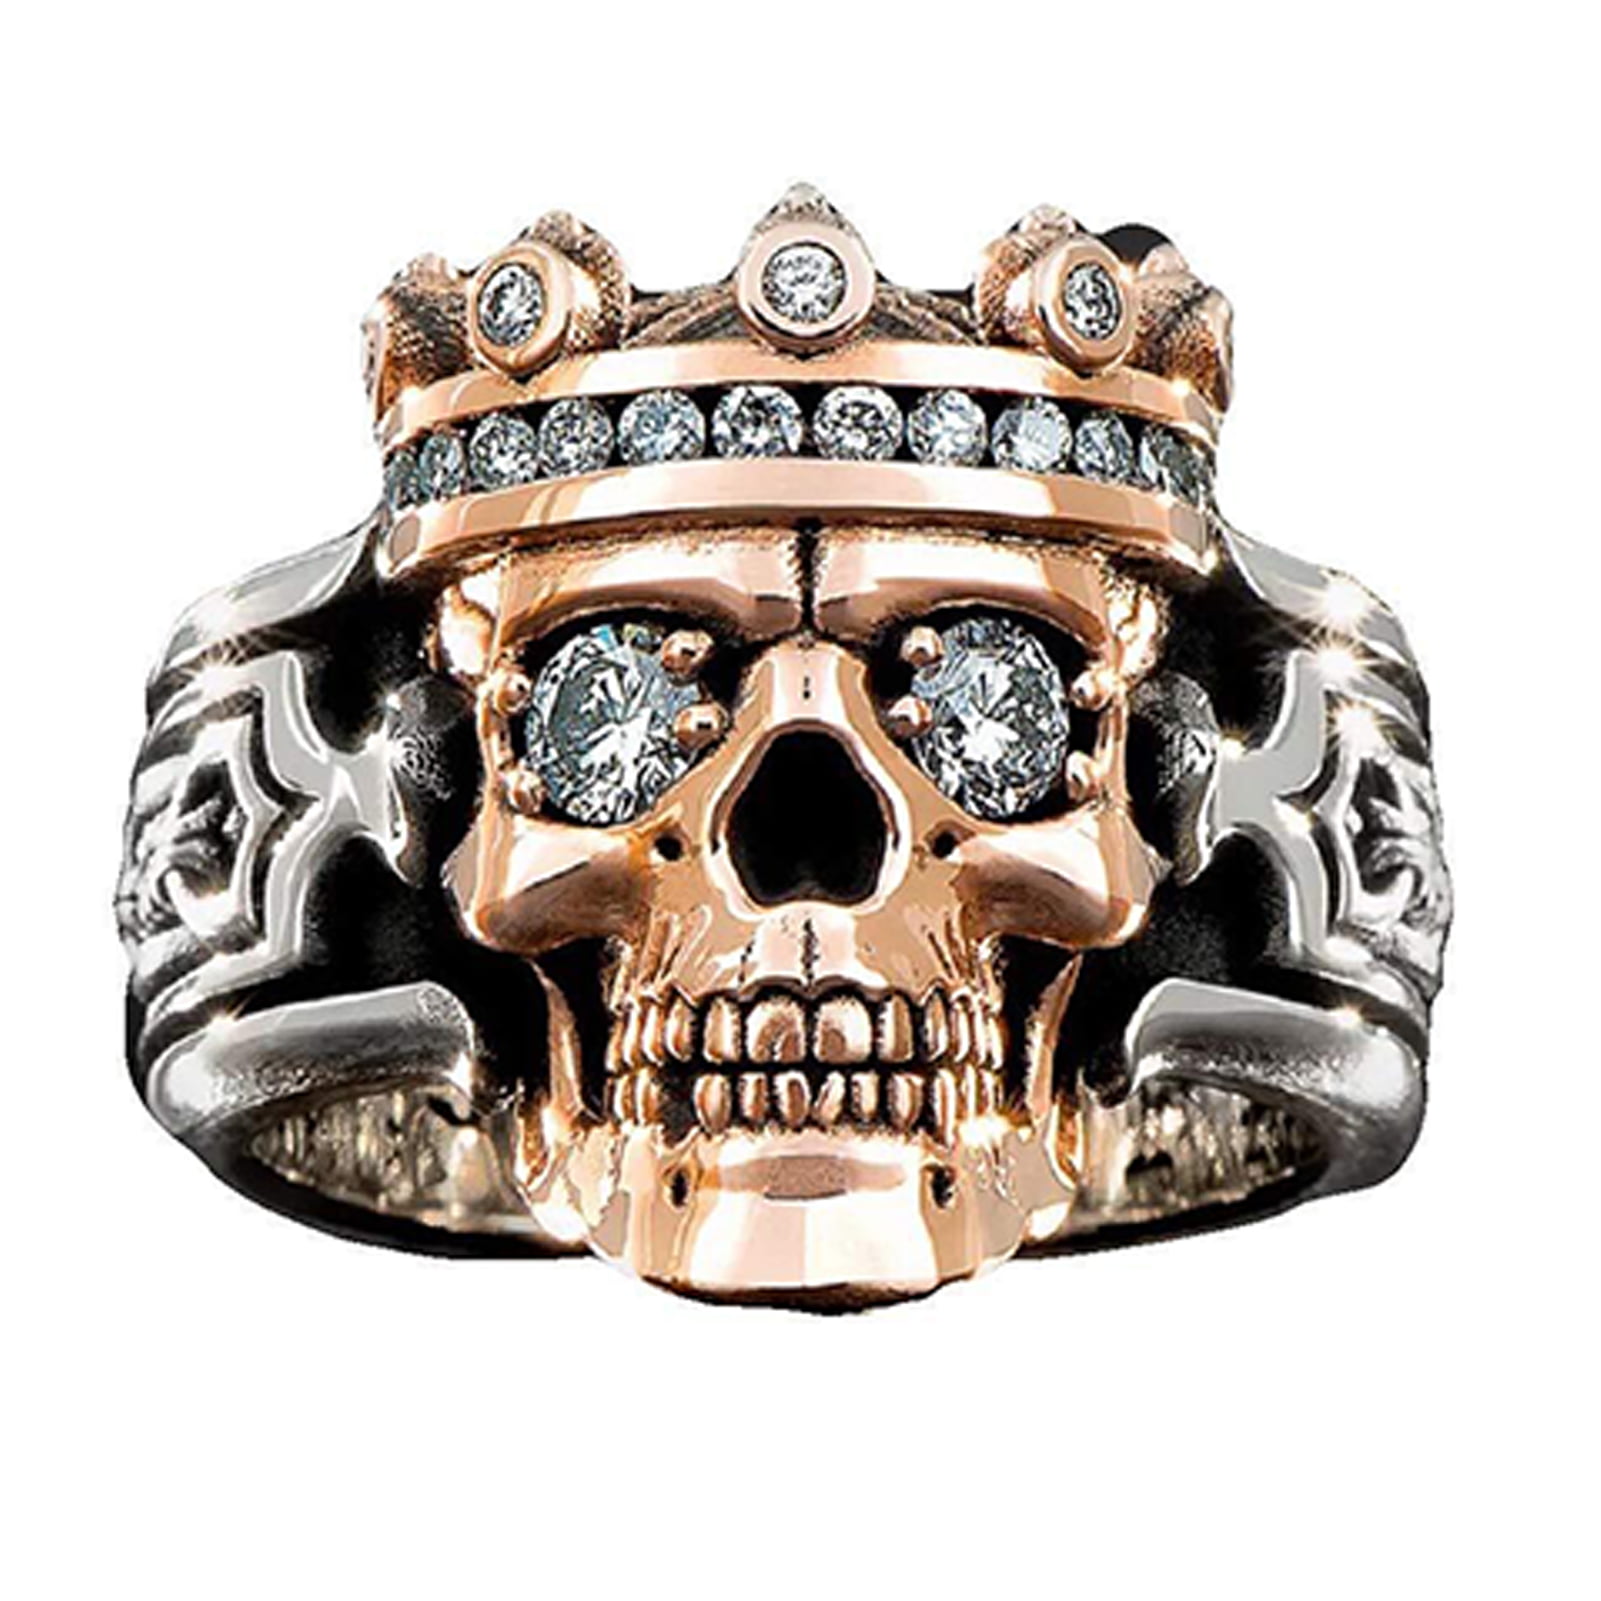 Silver Skull Head Biker Rings Colorful American Flag Exquisite Mask Ornament 